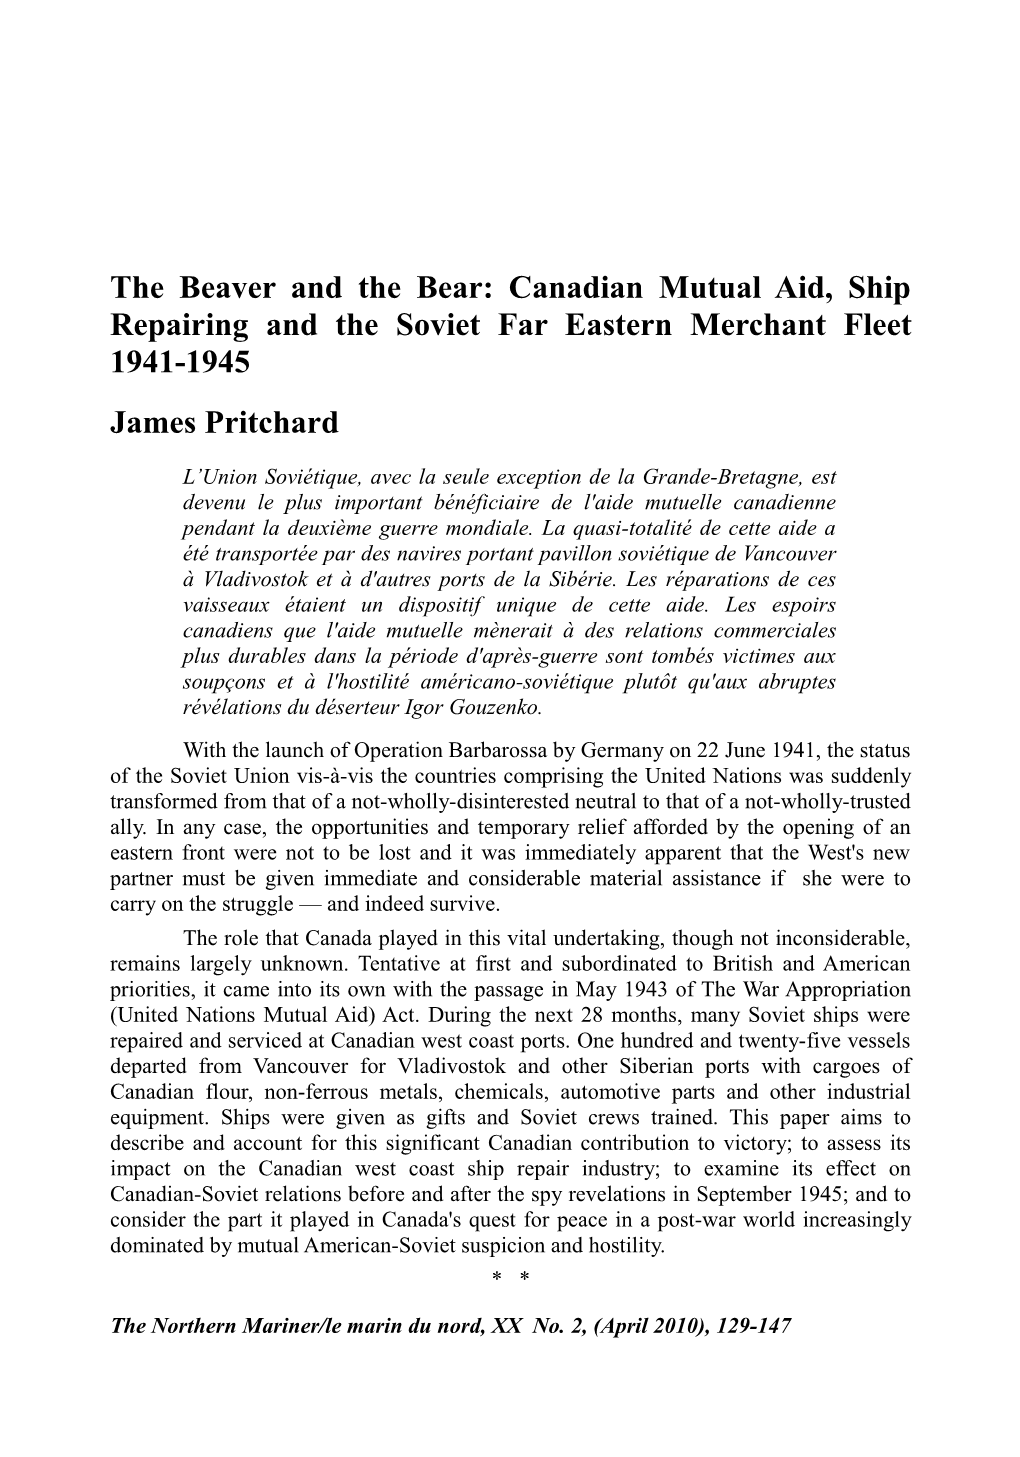 The Beaver and the Bear: Canadian Mutual Aid, Ship Repairing and the Soviet Far Eastern Merchant Fleet 1941-1945 James Pritchard